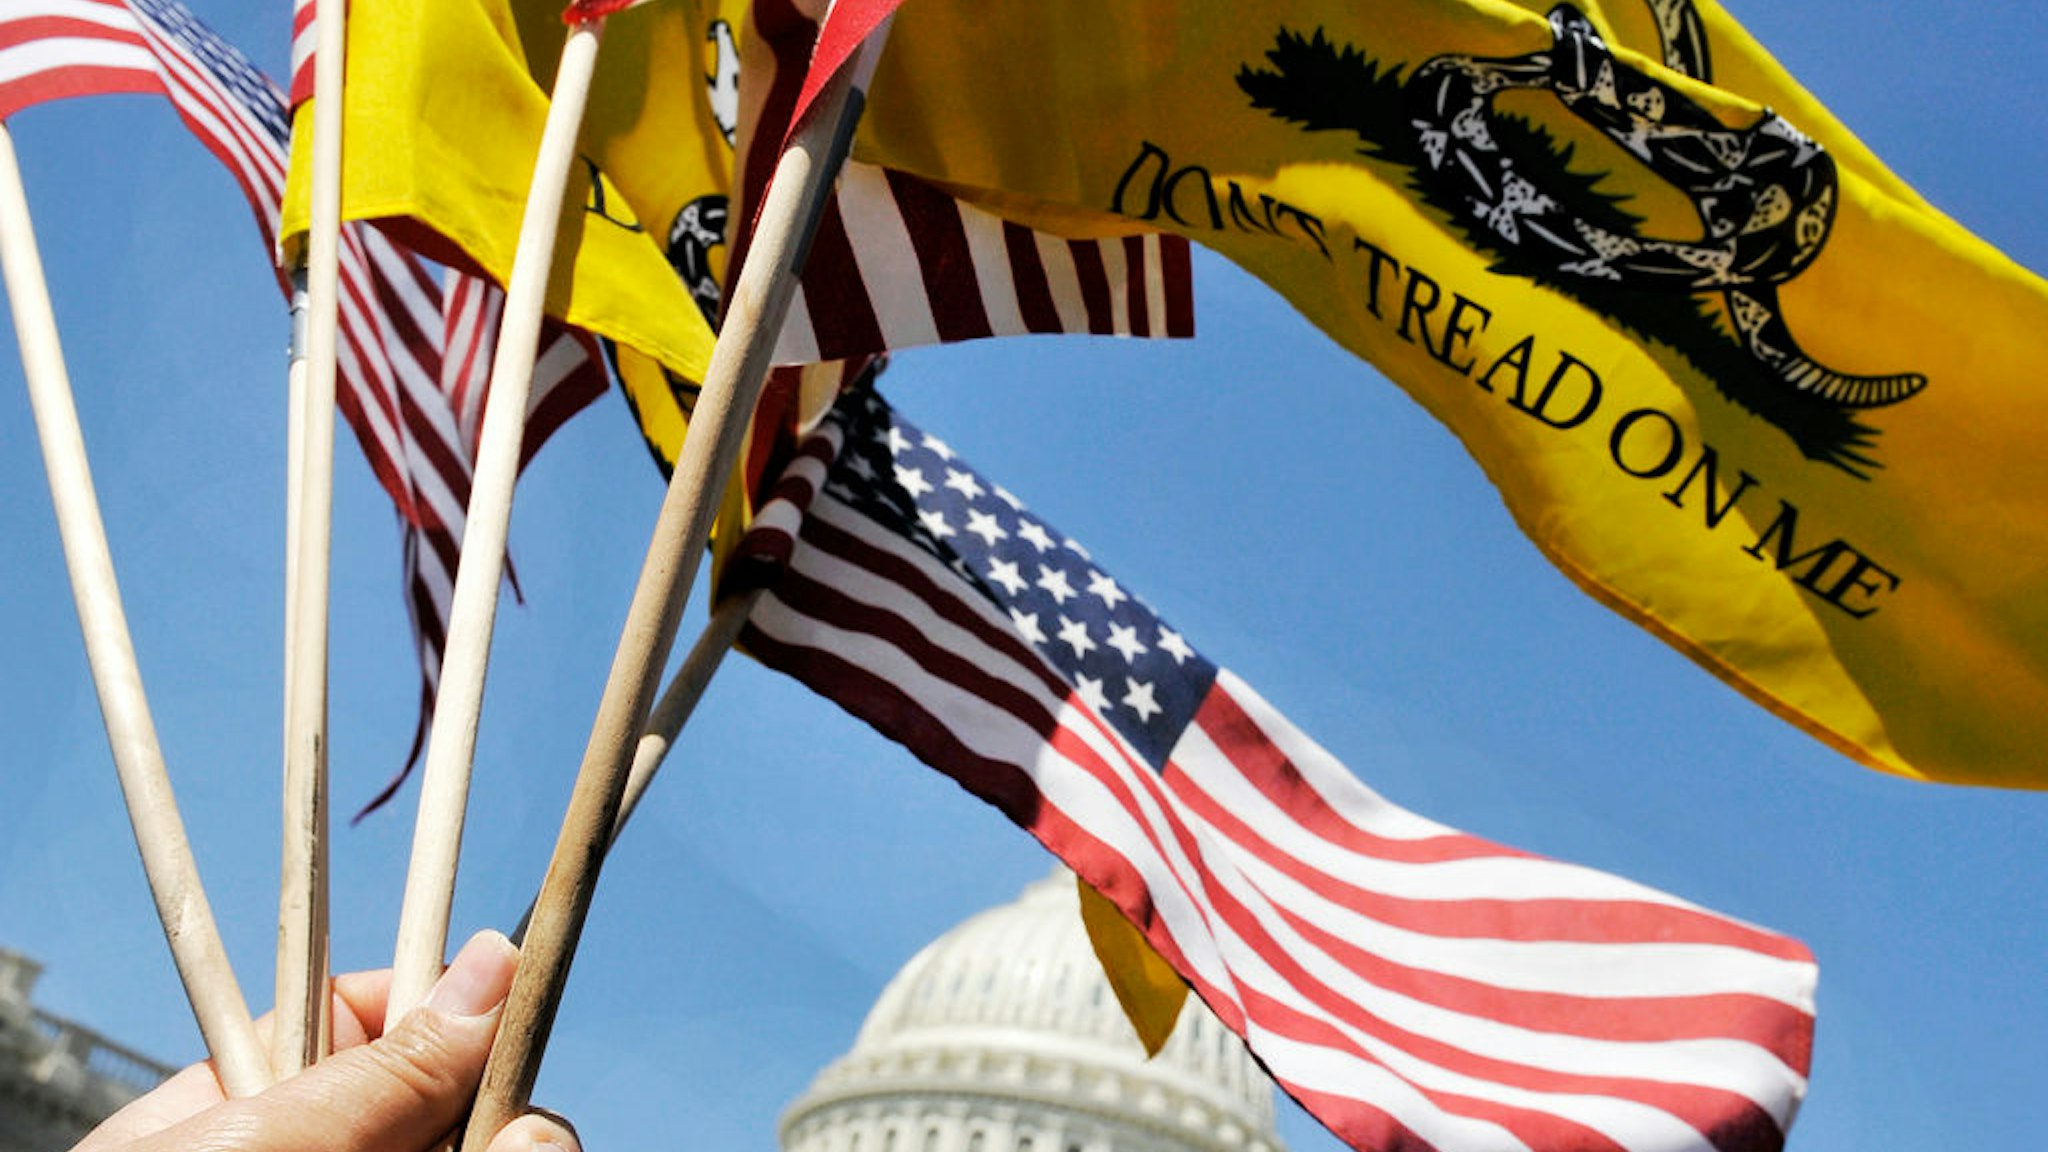 U.S. flags and Gadsden flags fly in the breeze as Americans For Prosperity hold a tea party rally outside at the Capitol to emphasize their desire for huge spending cuts in the budget, April, 06, 2011 in Washington, DC.